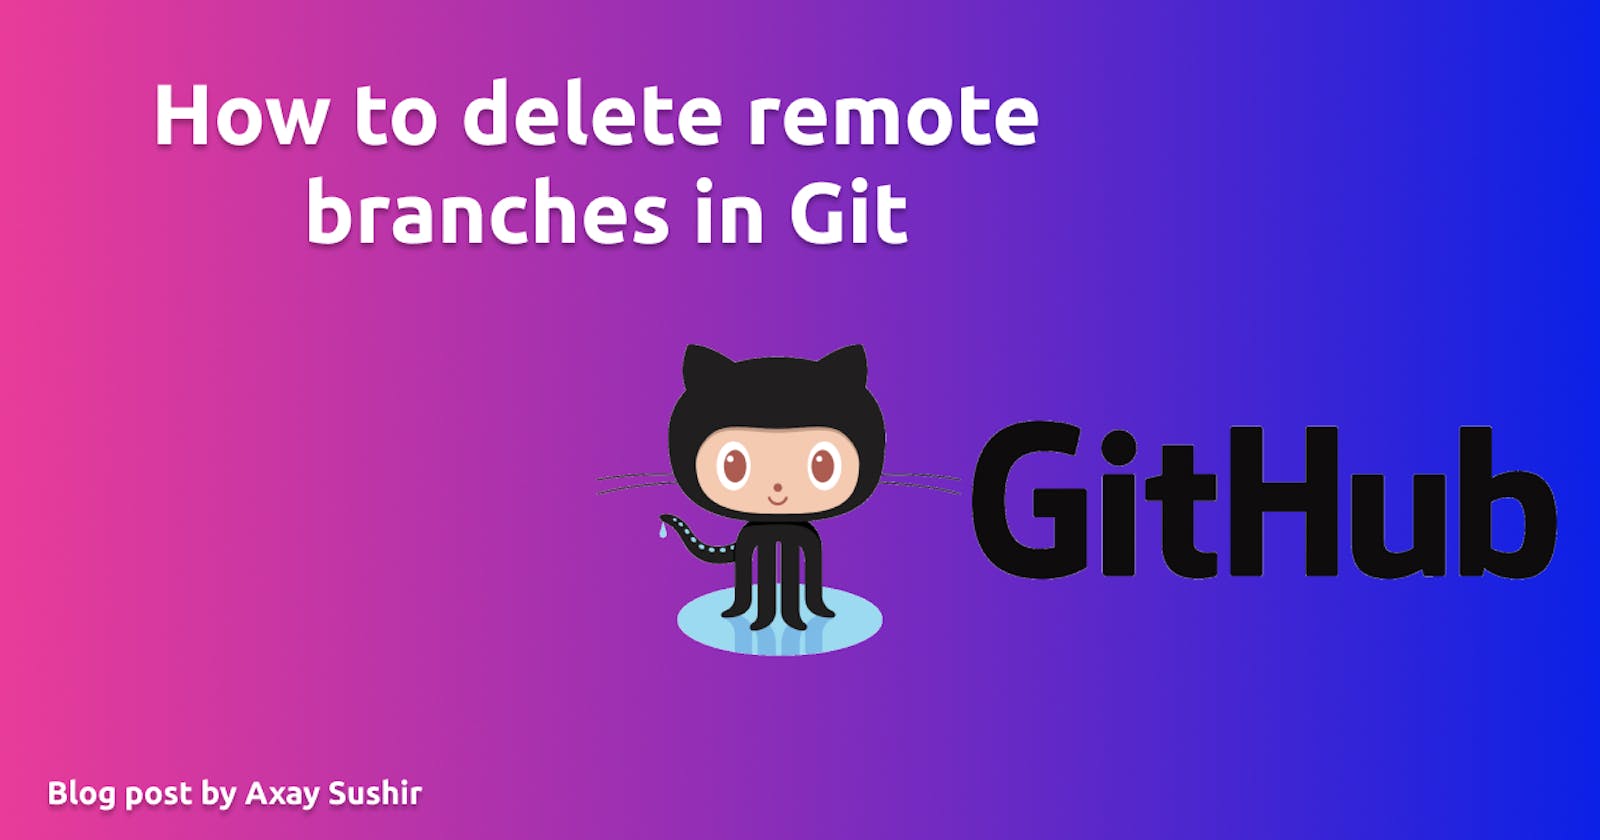 How to delete remote branches in Git